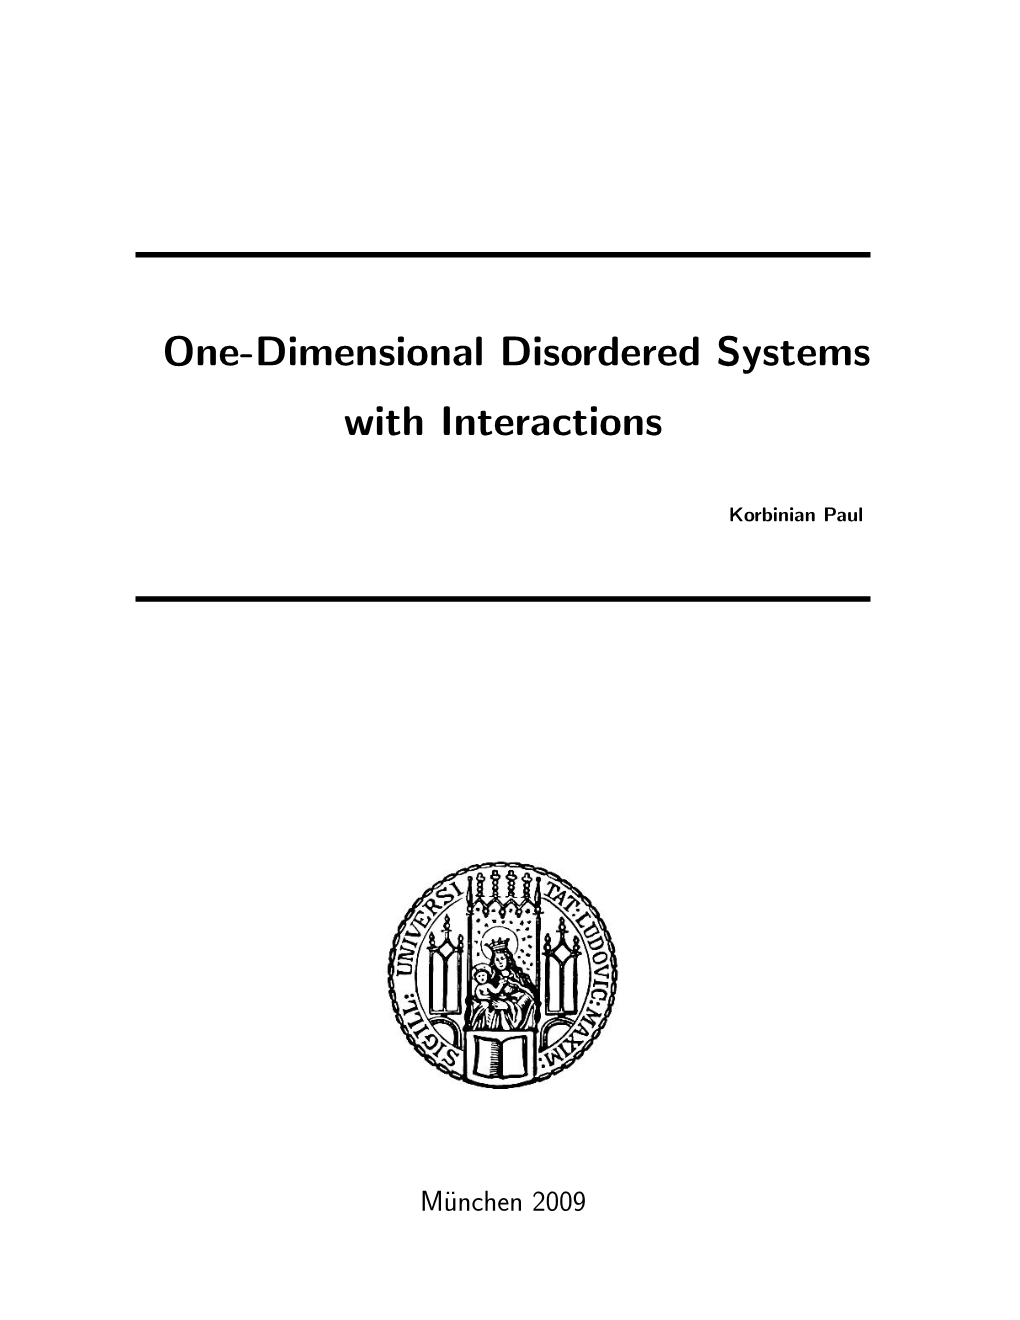 One-Dimensional Disordered Systems with Interactions